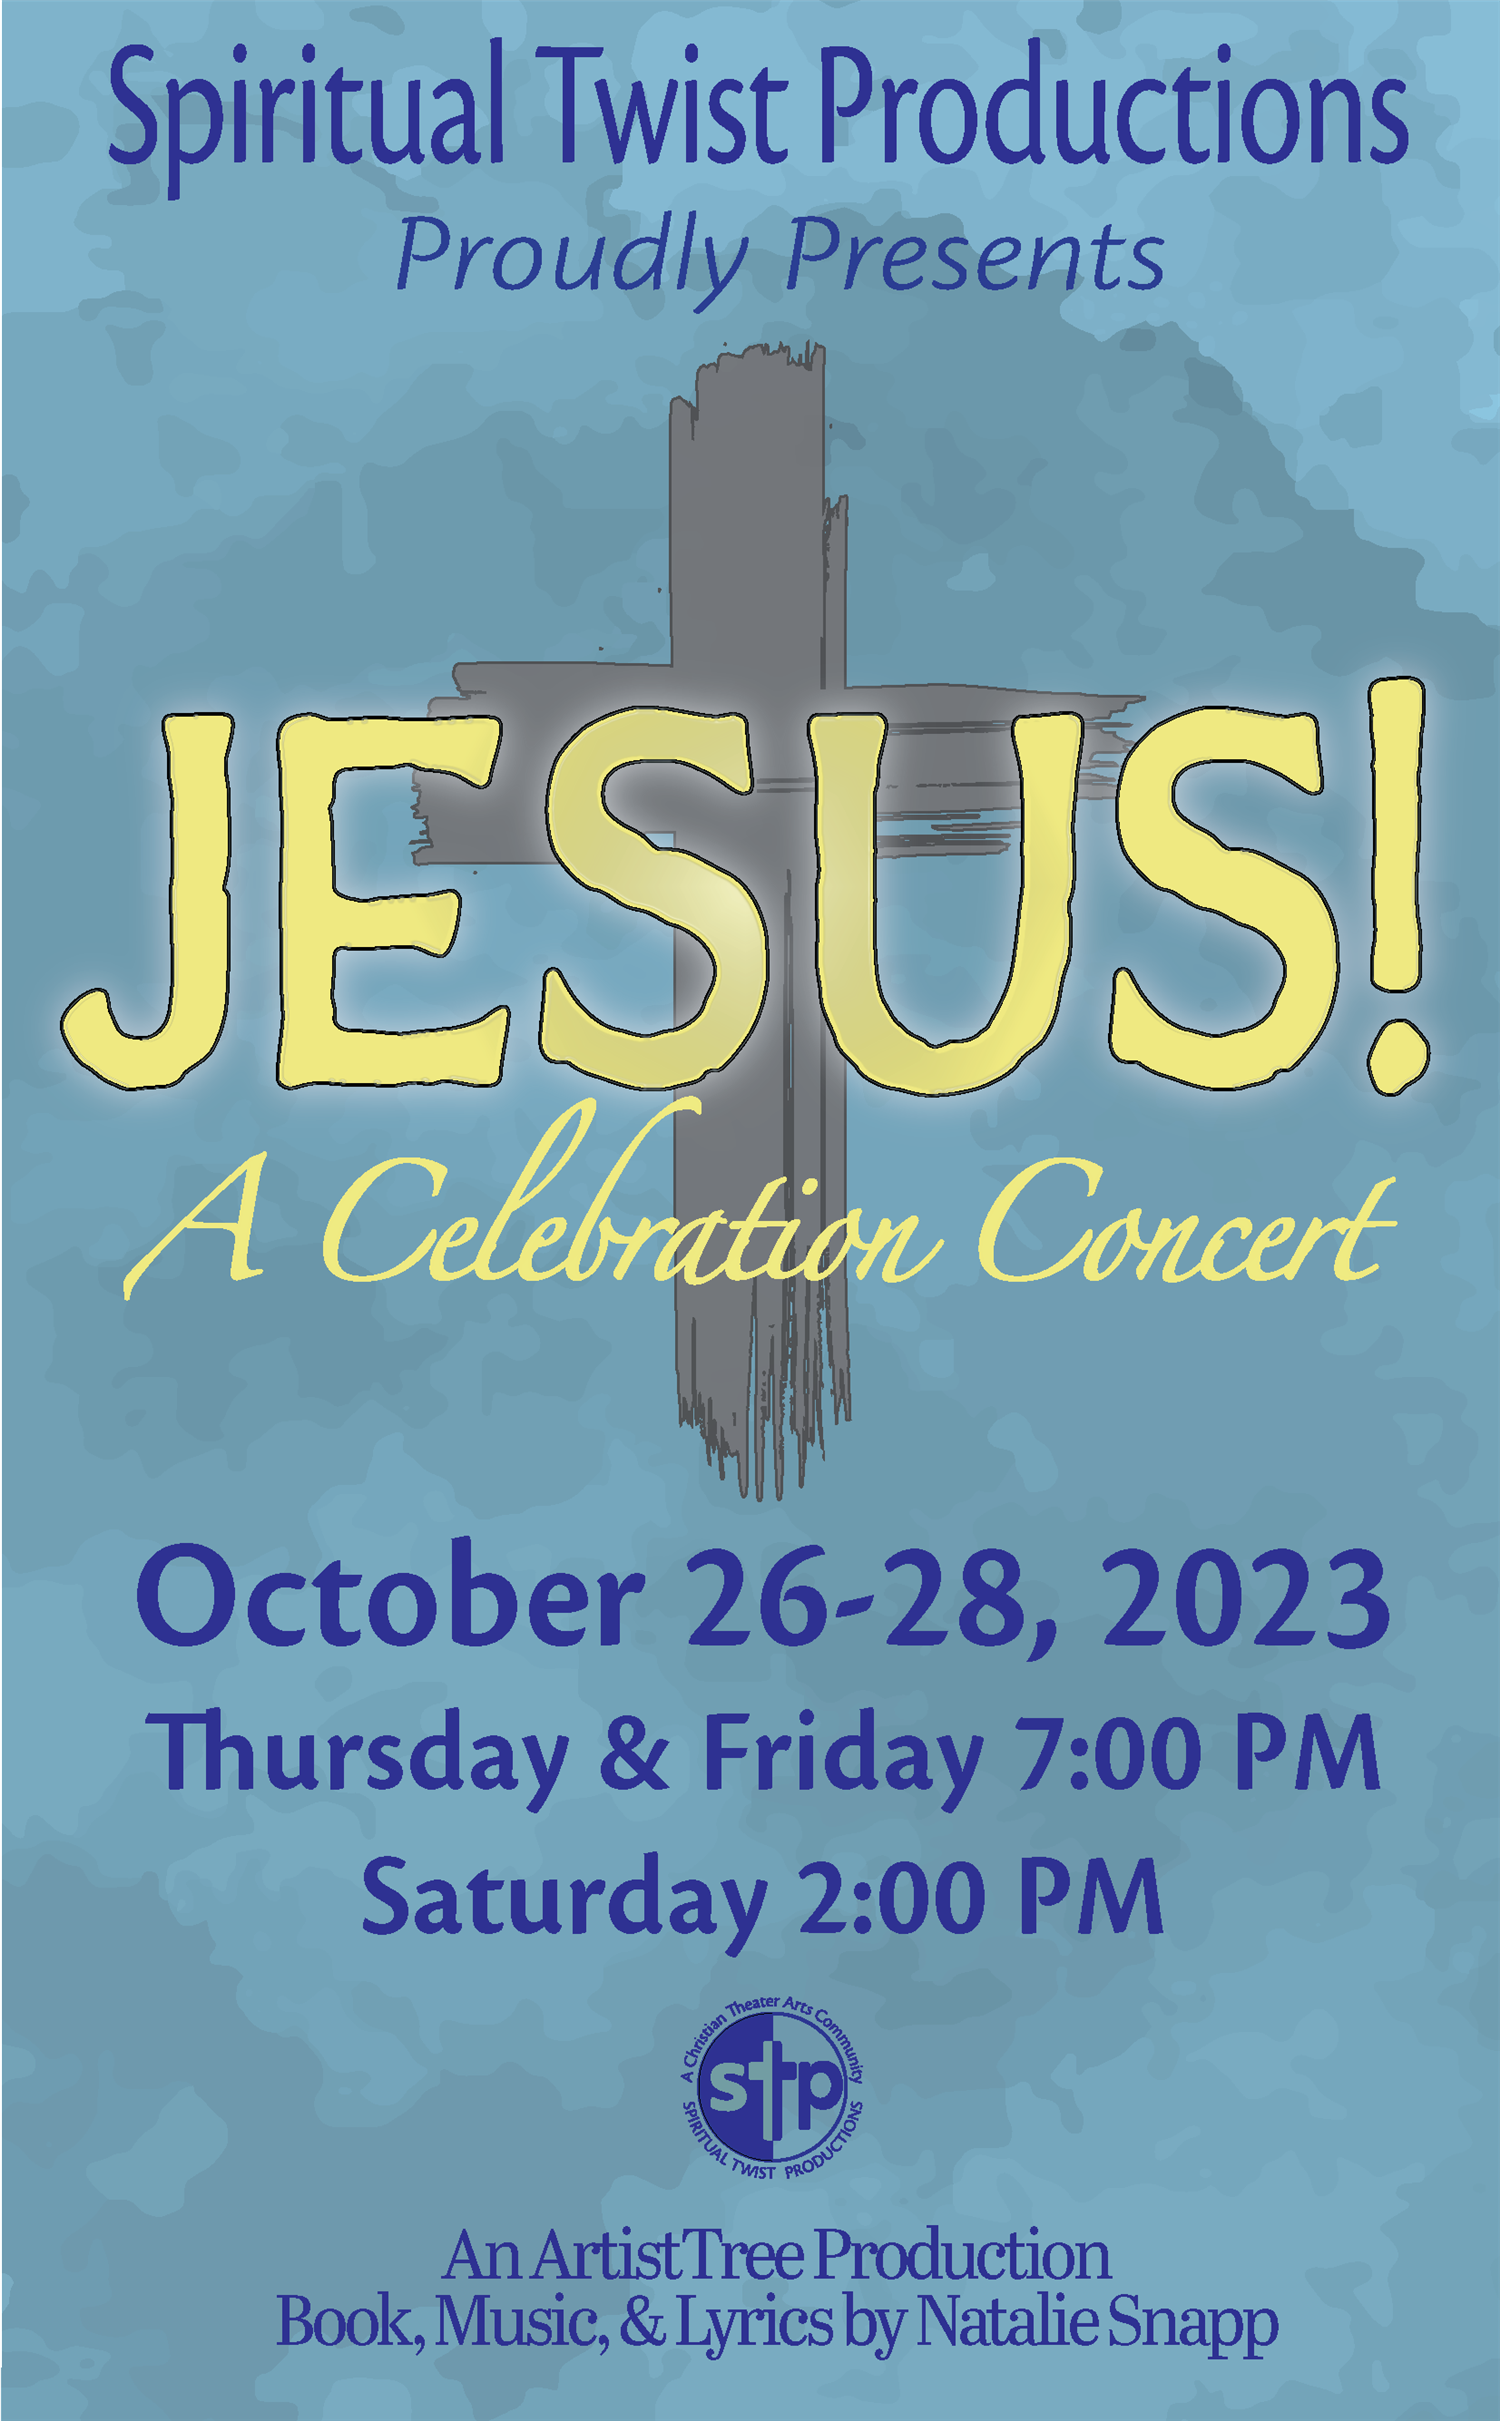 JESUS! A Celebration Concert Thursday, October 26, 2023 @ 7 PM All Tickets $10 each on Oct 26, 19:00@Spiritual Twist Productions - Pick a seat, Buy tickets and Get information on Spiritual Twist Productions tickets.spiritualtwist.com